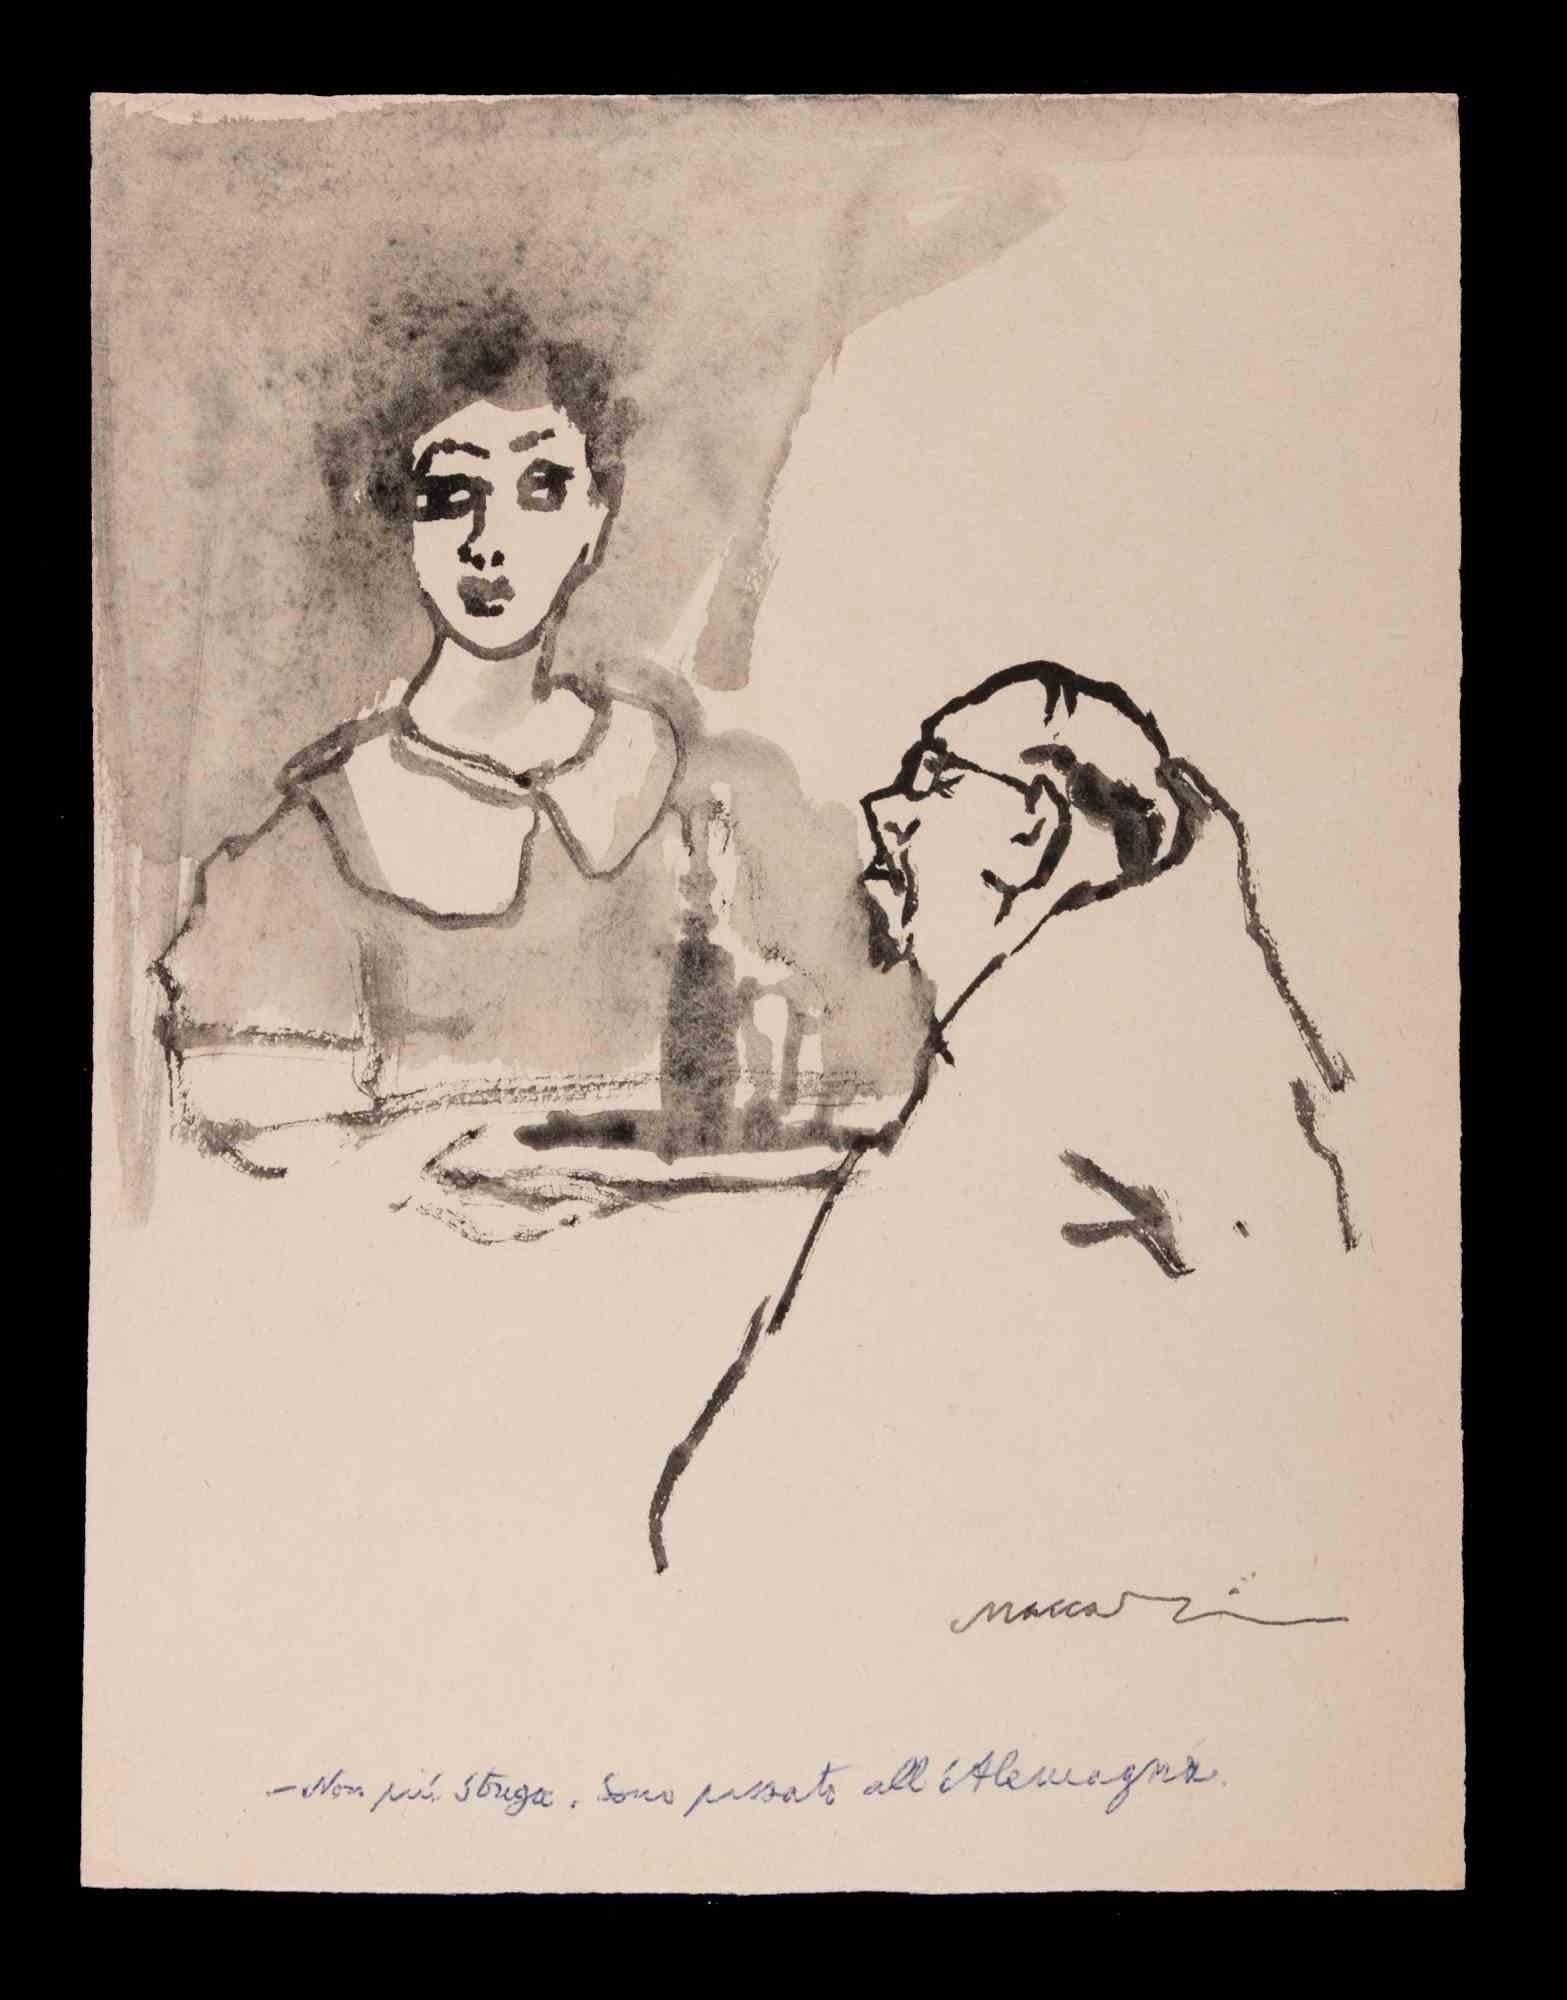 By the Trappist is a Watercolor Drawing realized by Mino Maccari (1924-1989) in 1960s.

Hand signed on the lower margin.

Good condition on a yellowed paper.

Mino Maccari (Siena, 1924-Rome, June 16, 1989) was an Italian writer, painter, engraver